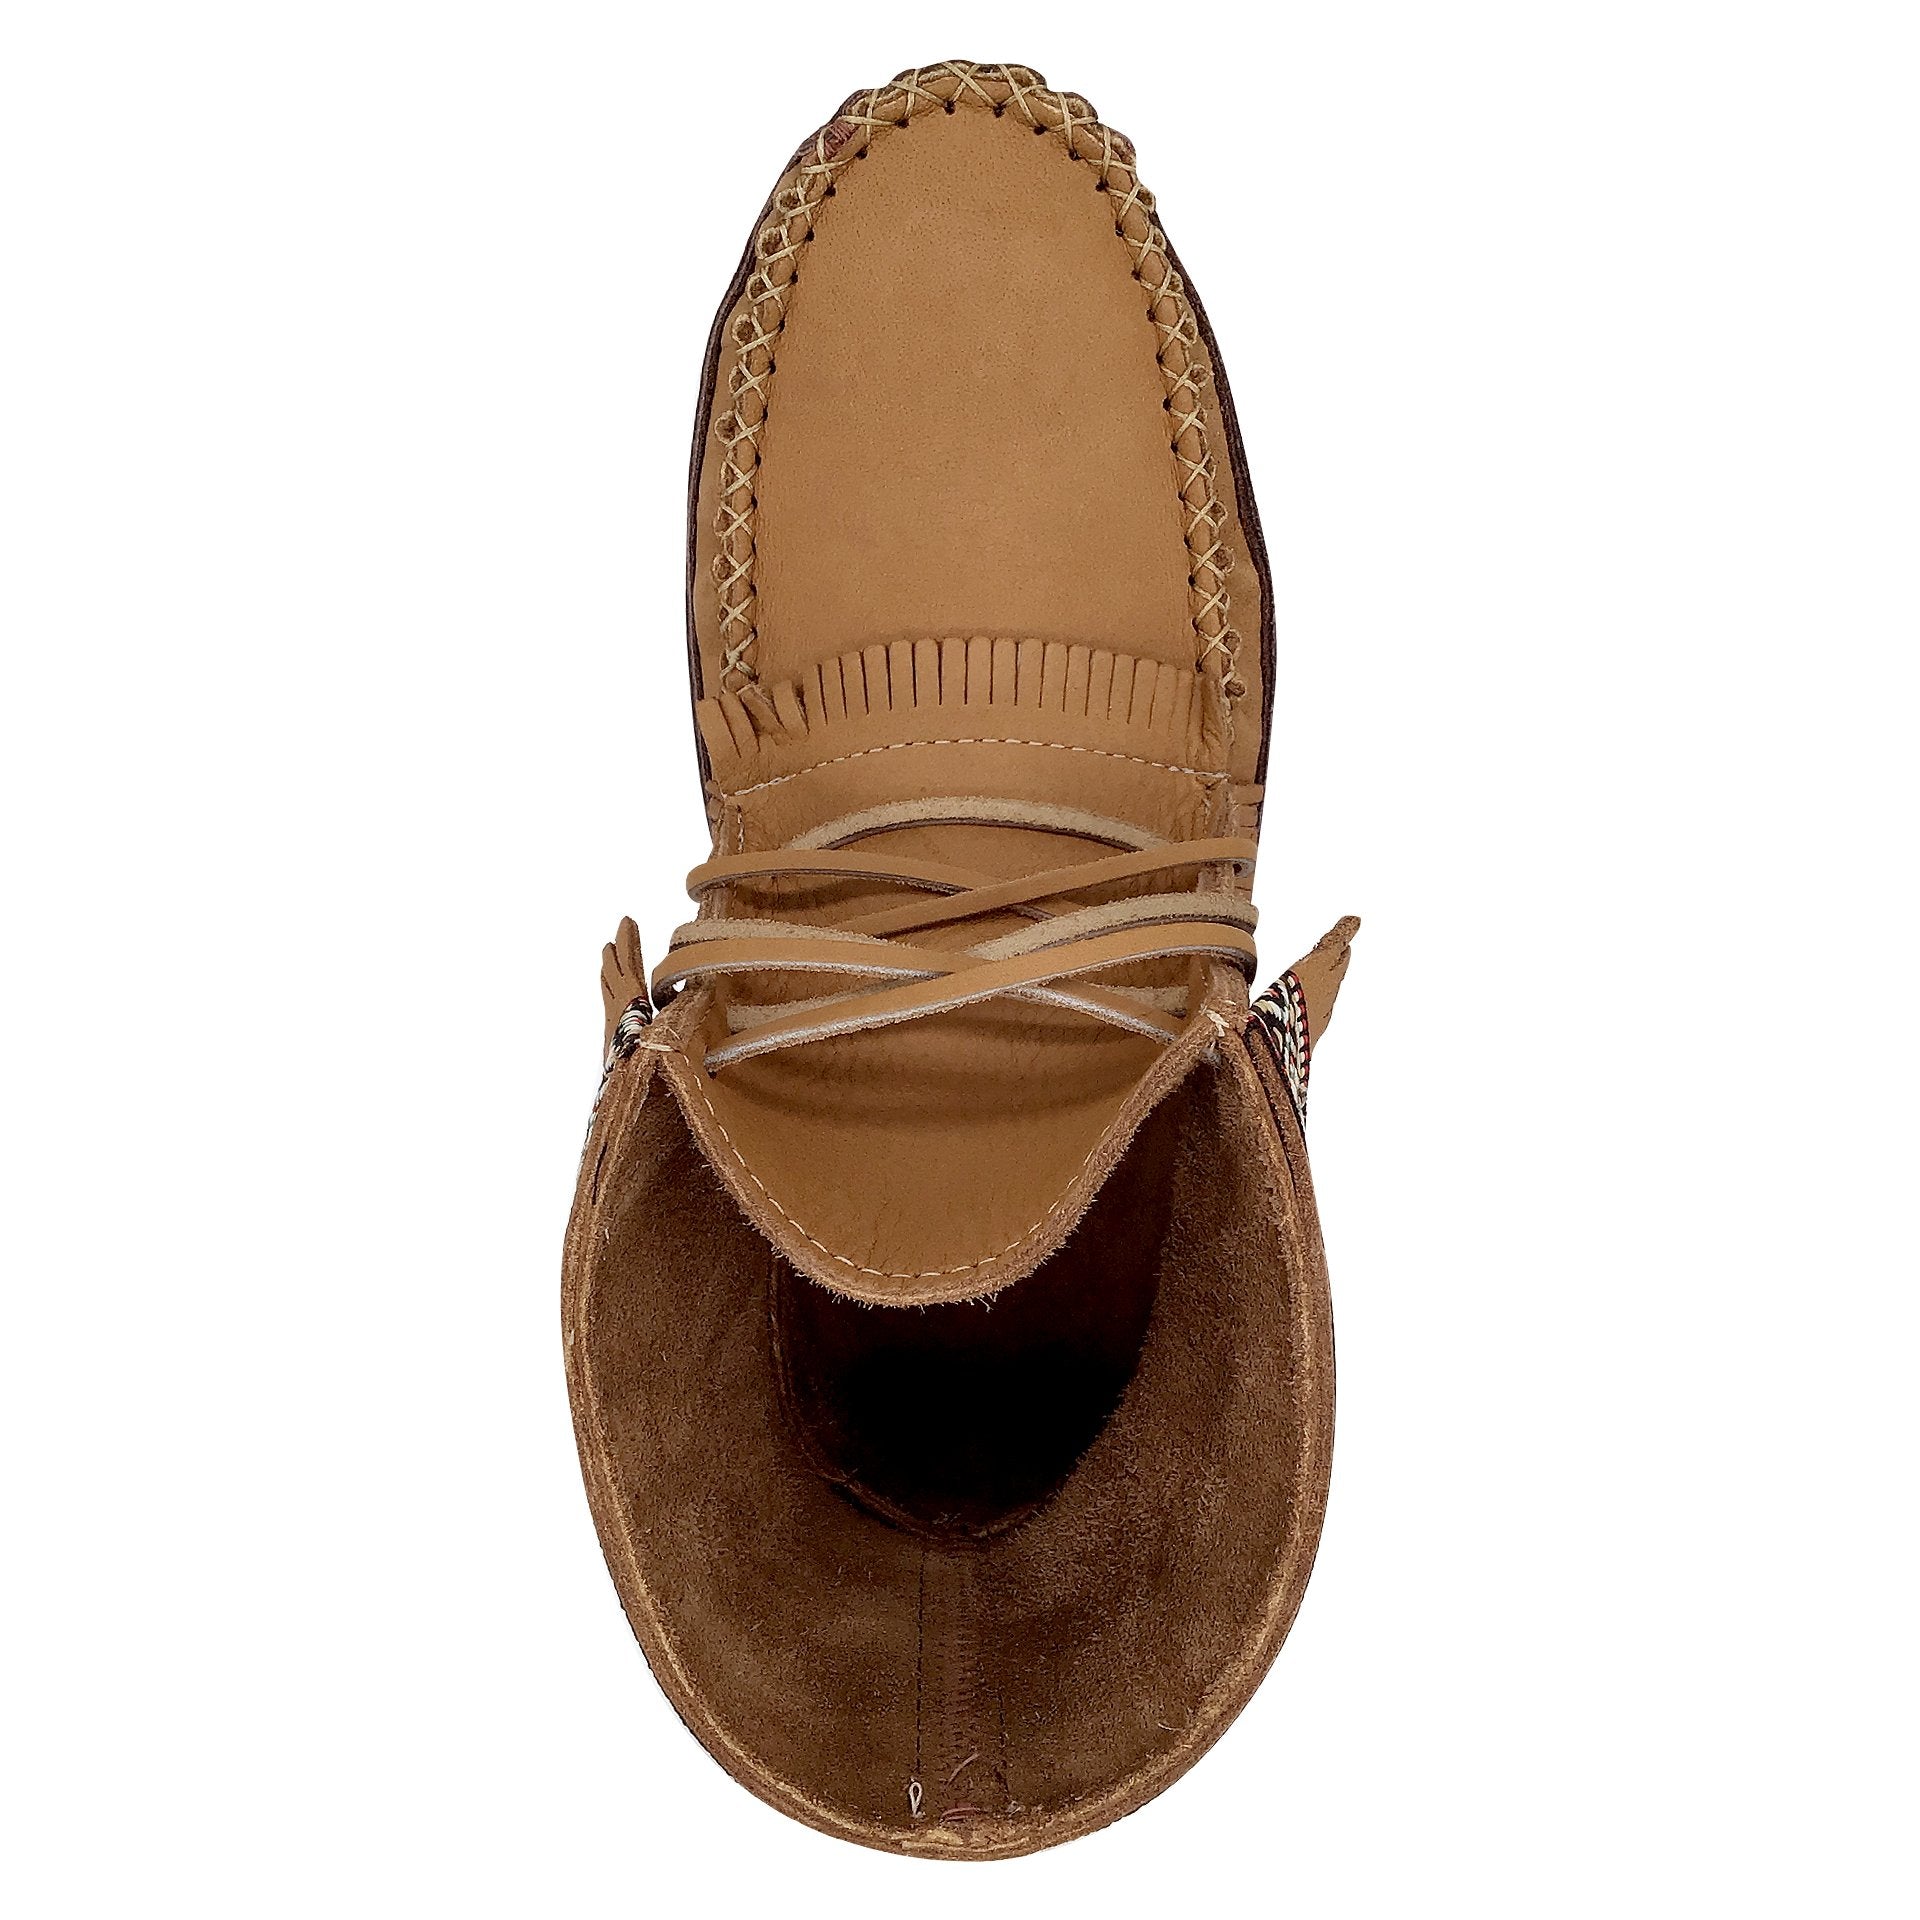 Men's Earthing Moccasin Boots Native Braid Fringed Leather Ankle